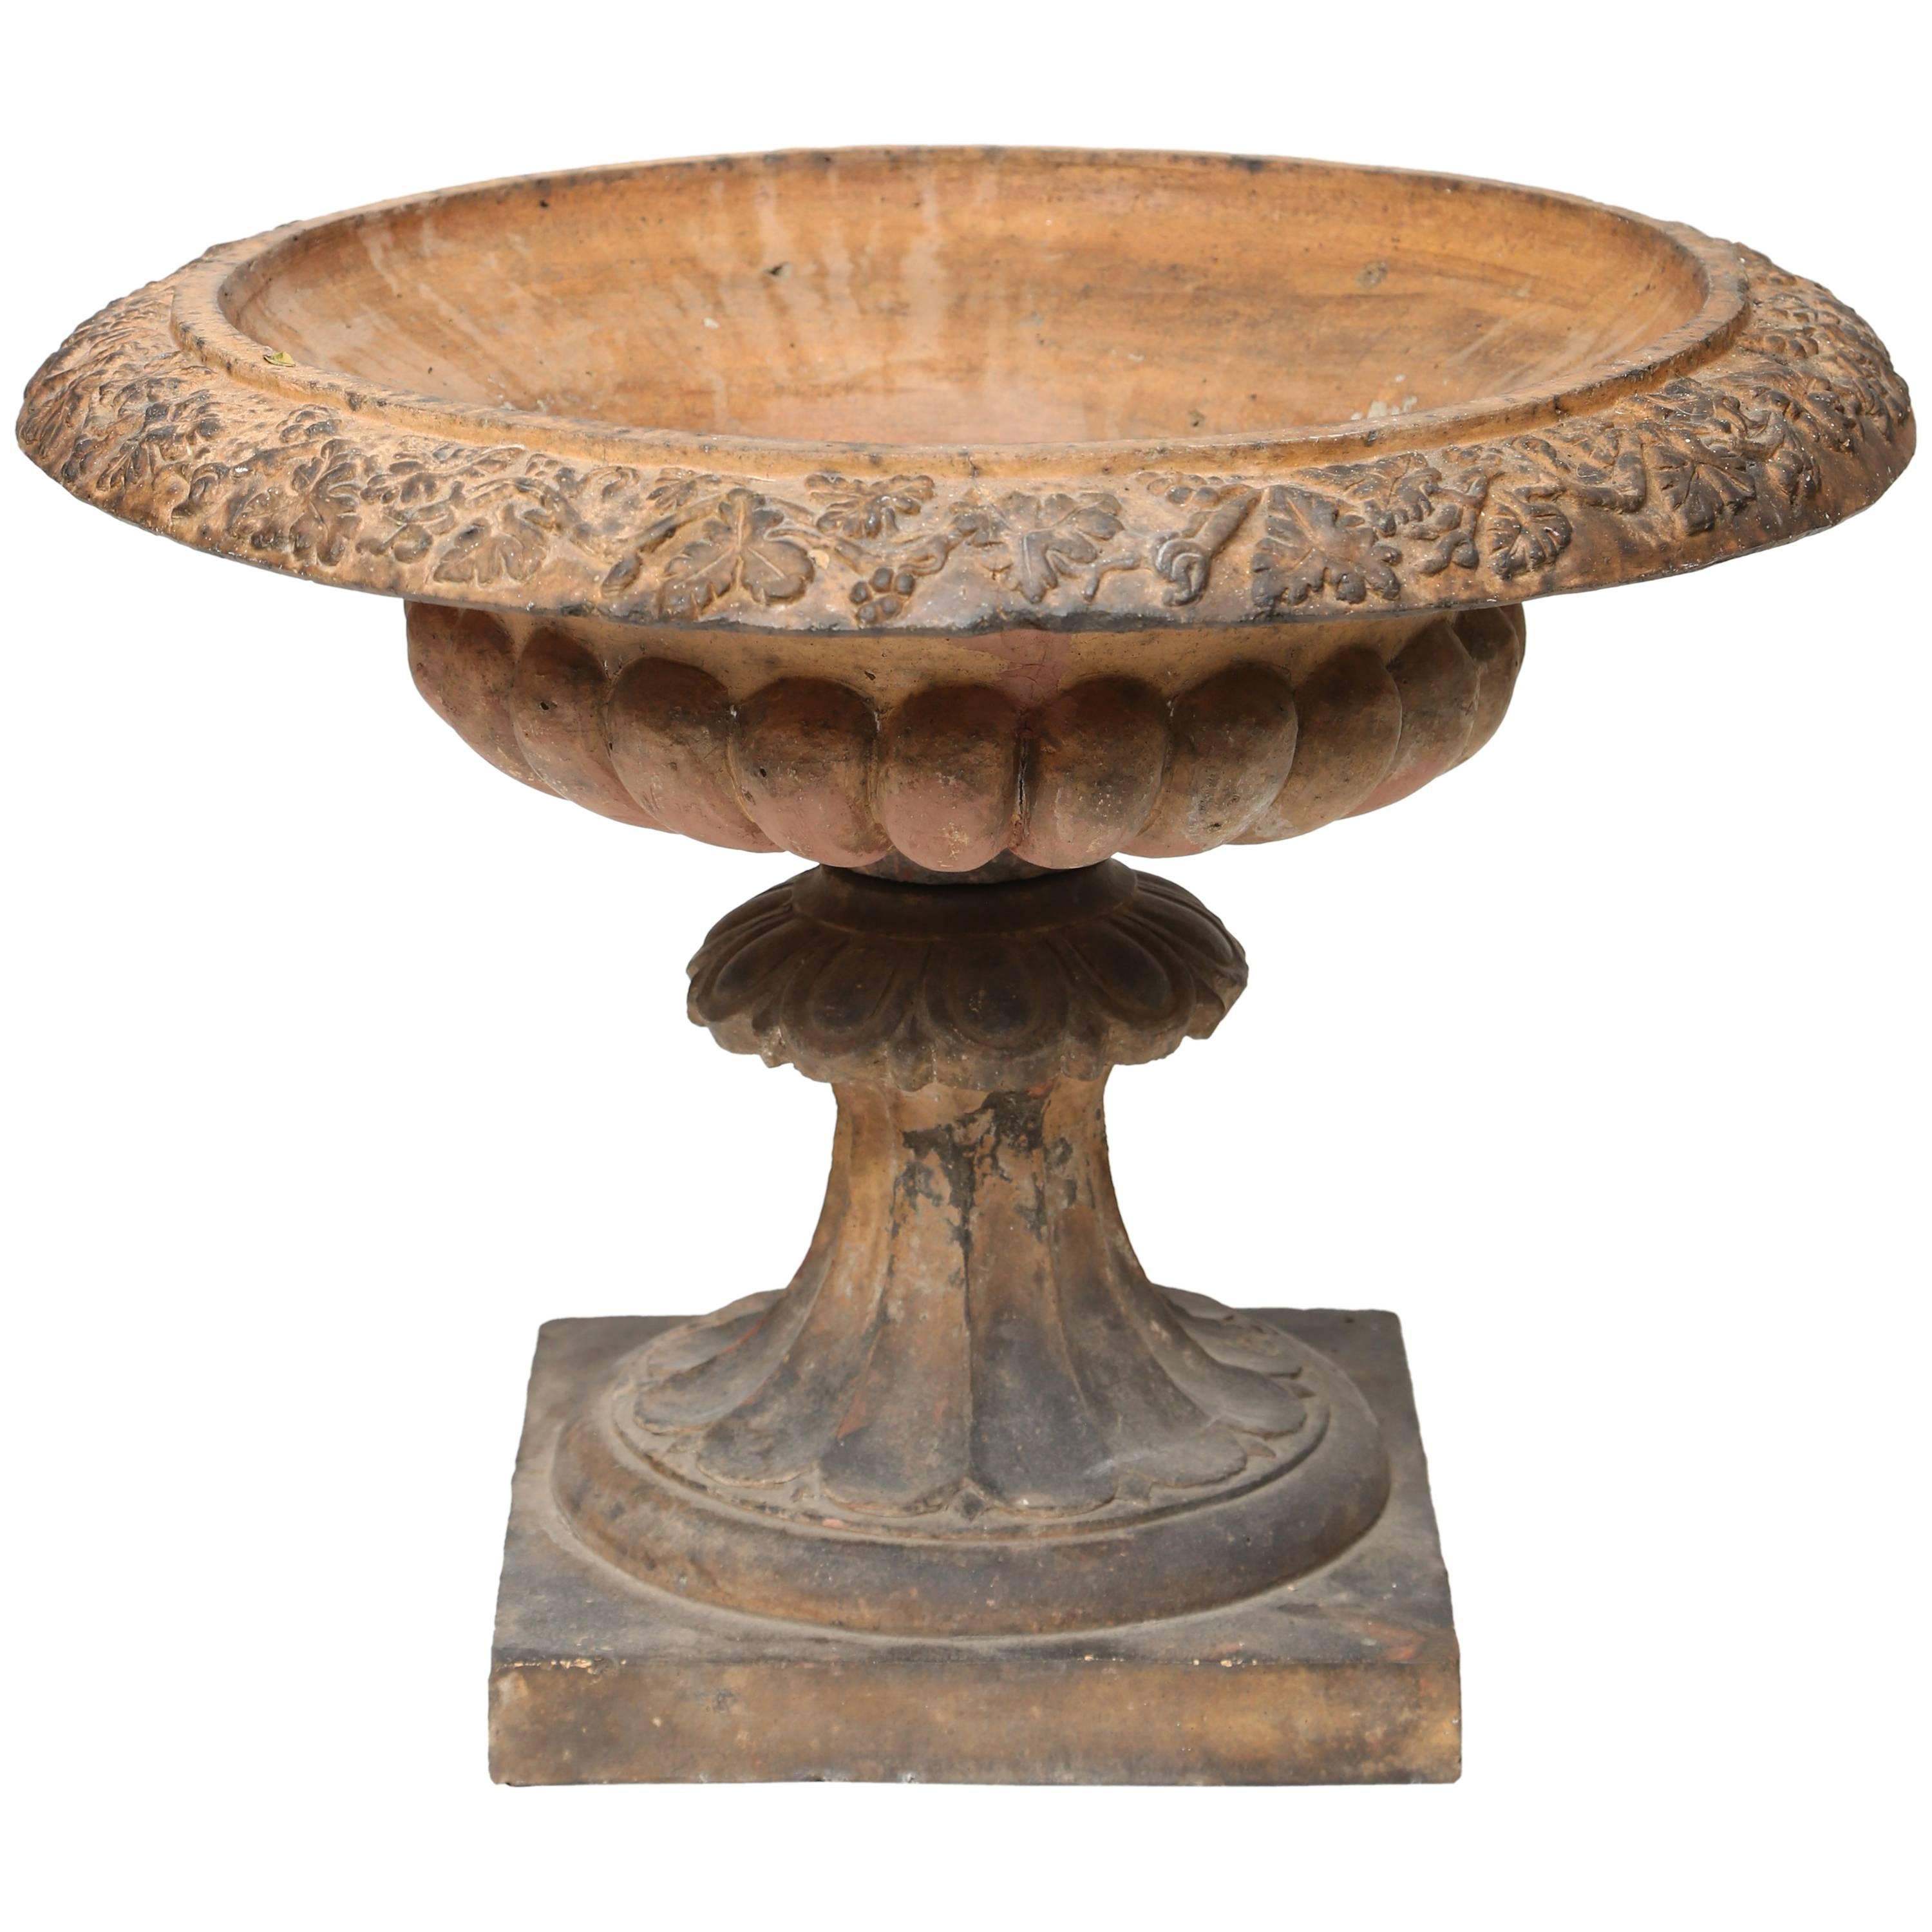 Wide Mouthed Terracotta Garden Urn on Stand-England, Nineteenth Century